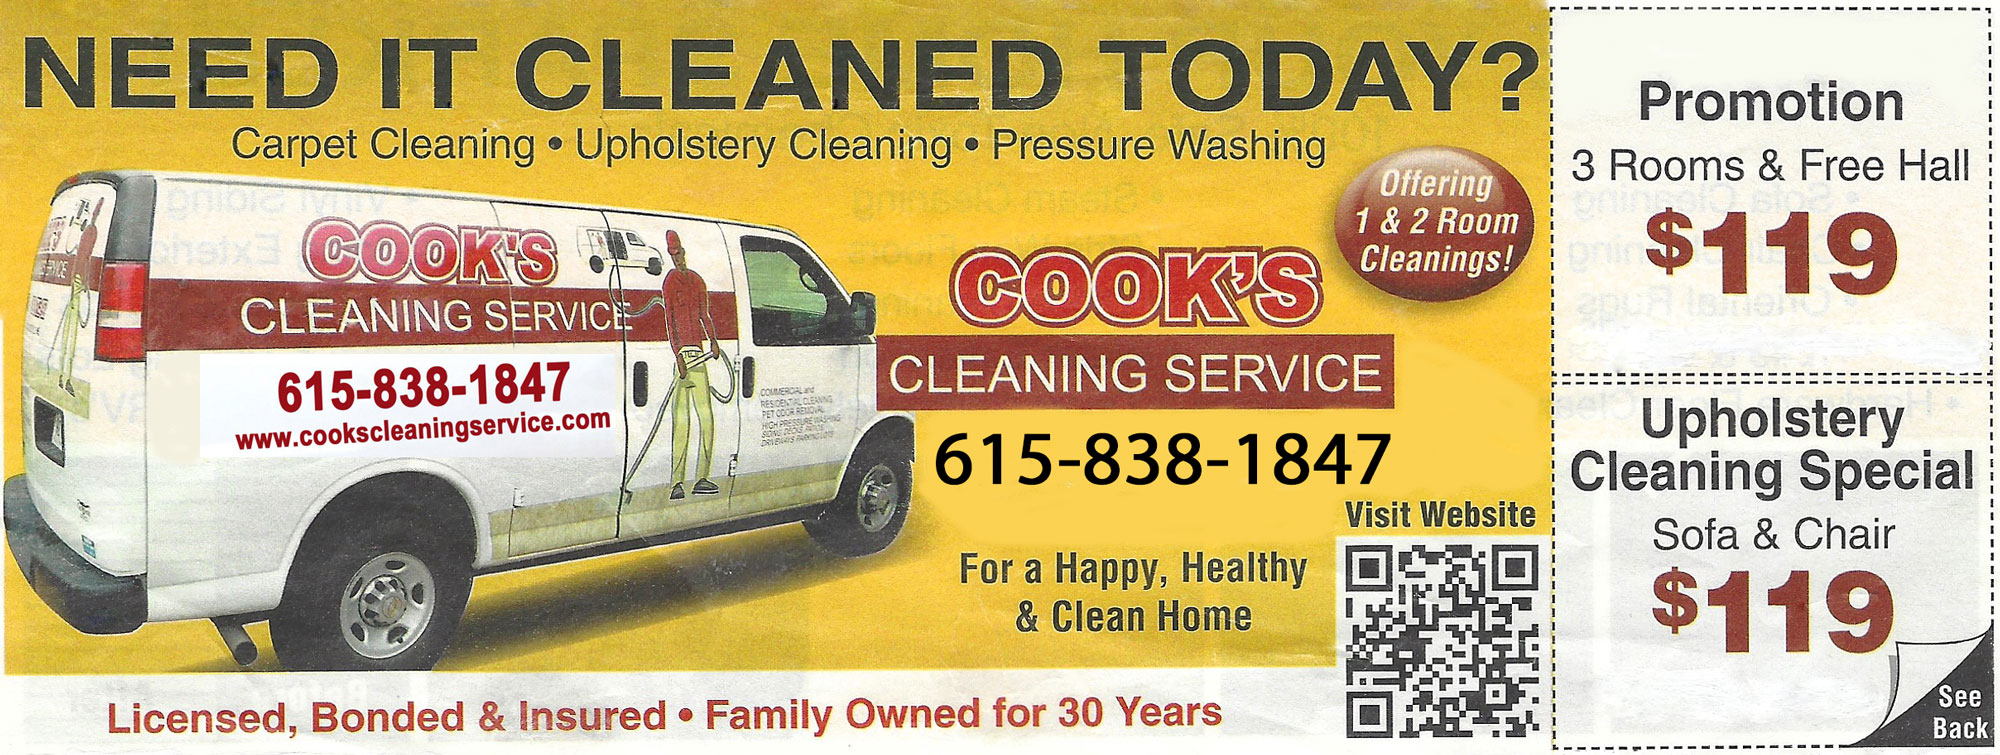 Cook's Cleaning Coupon